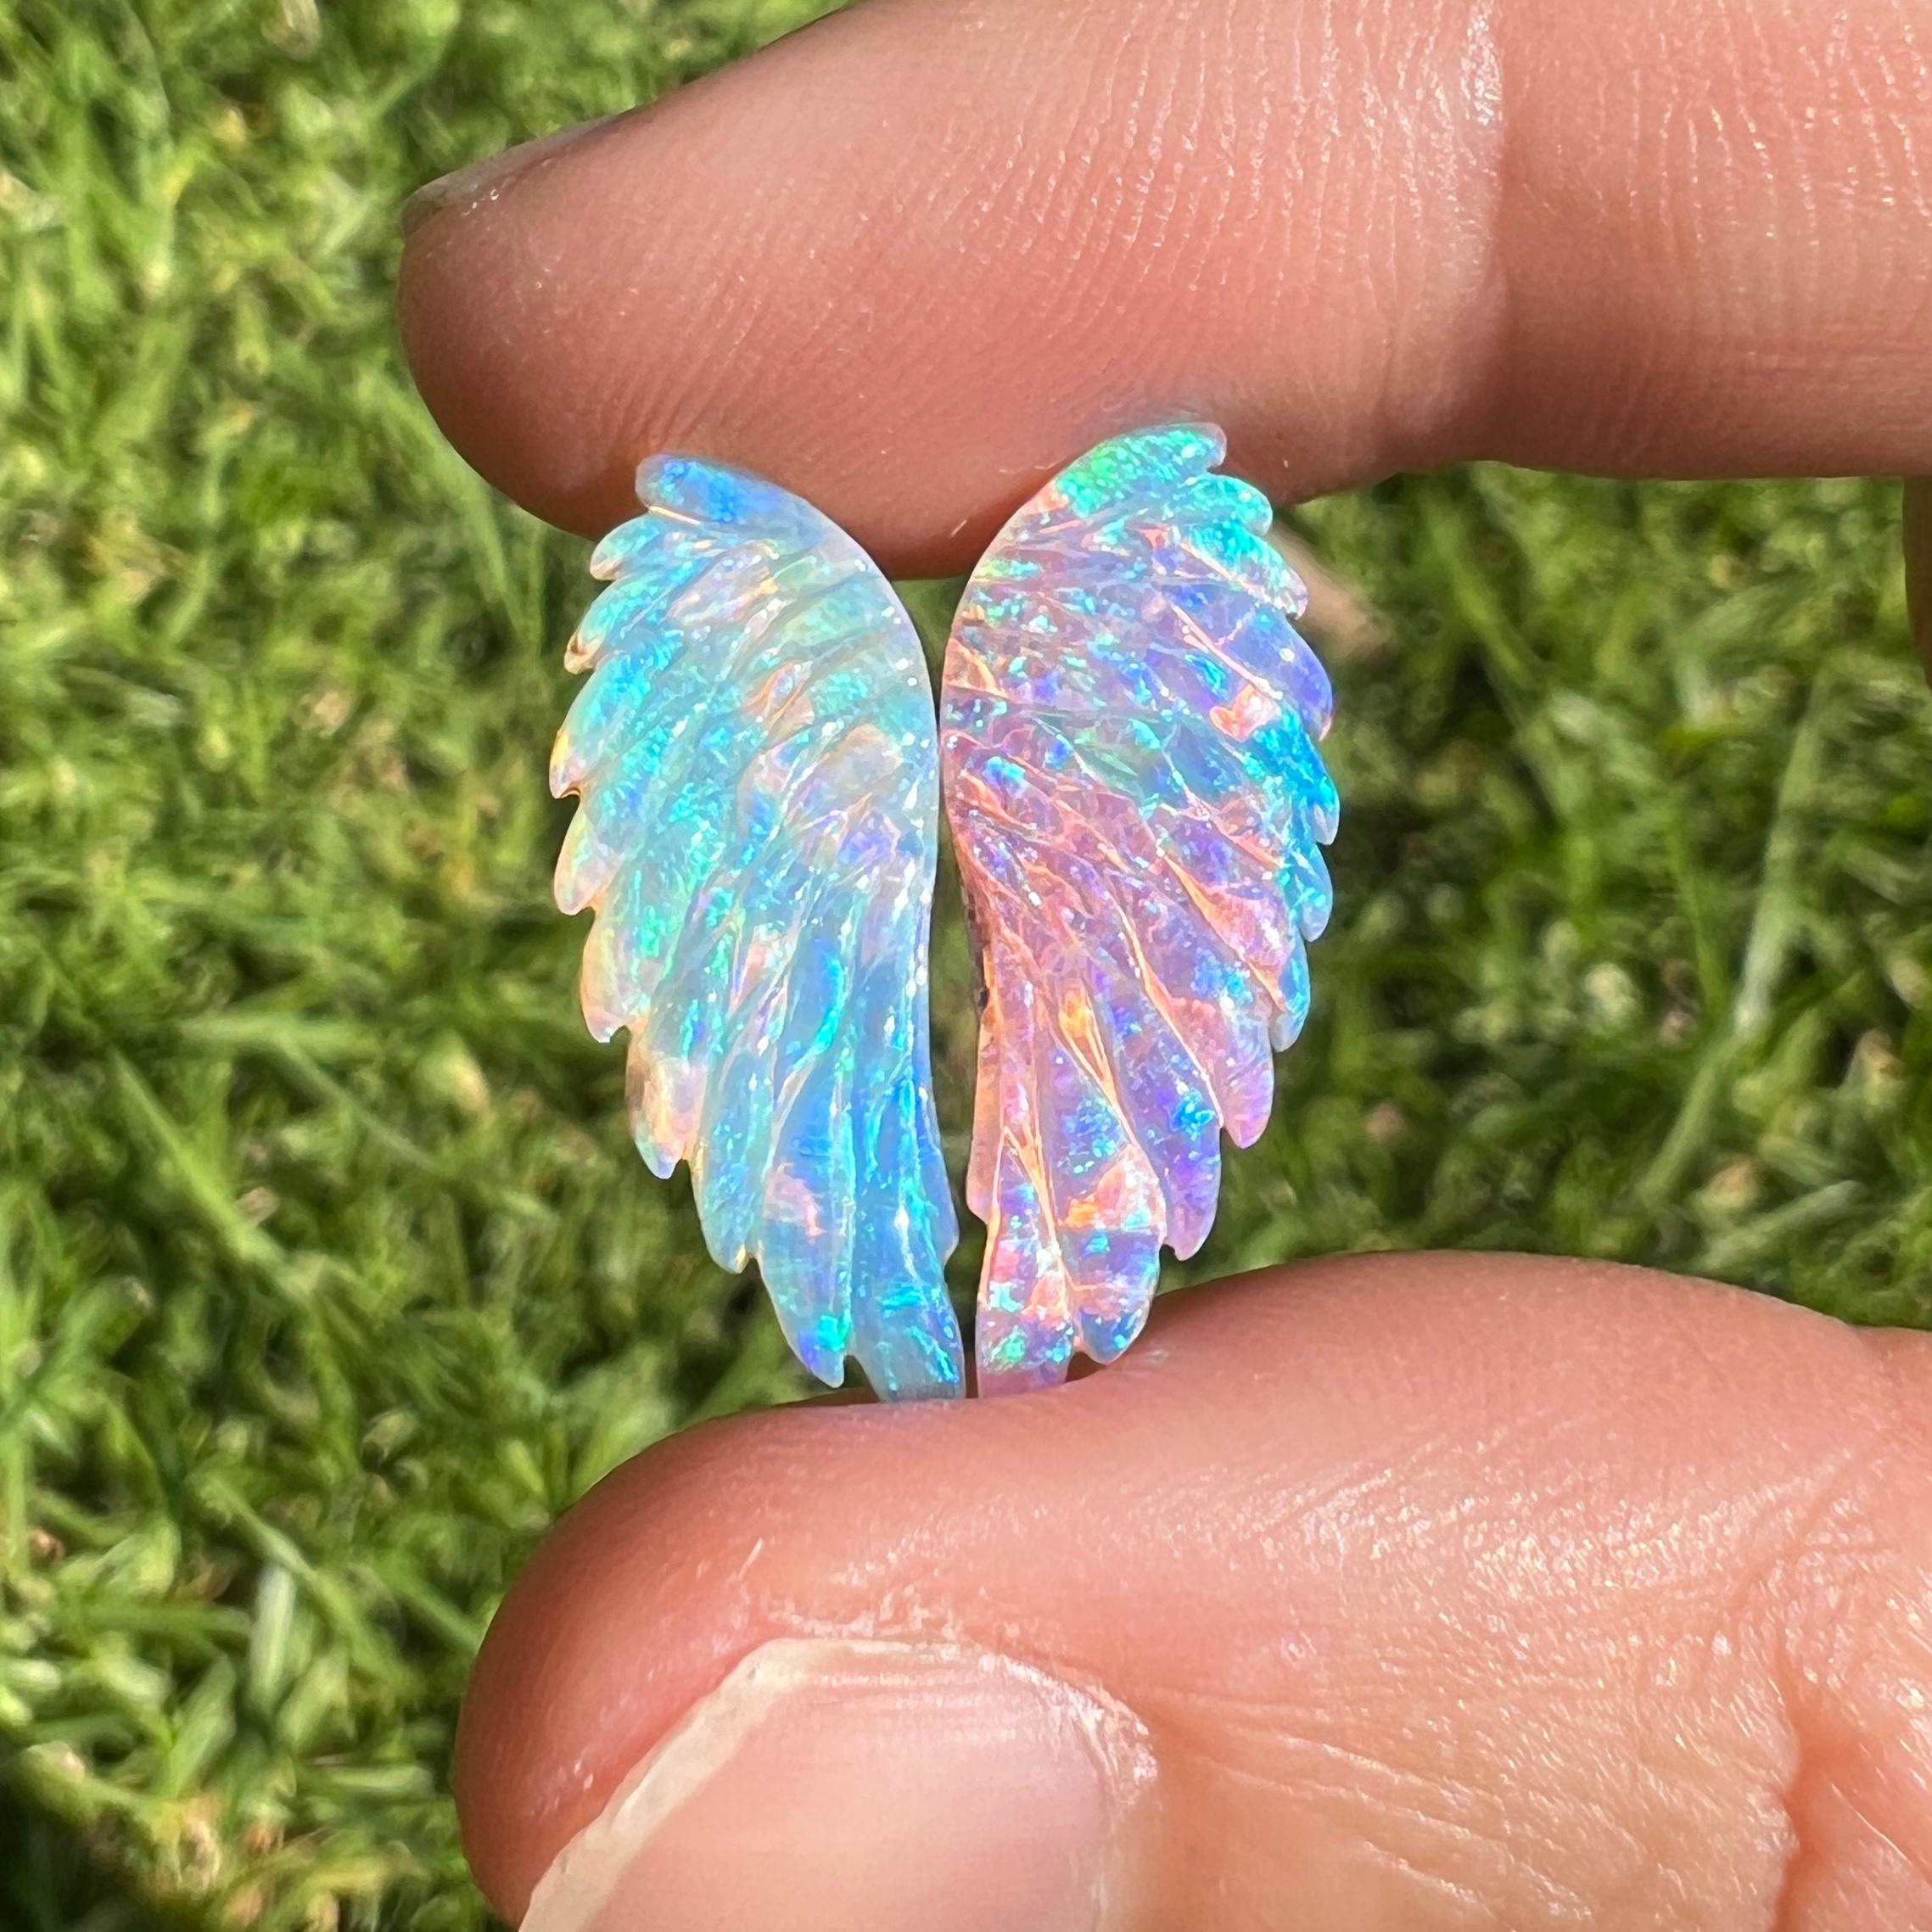 This beautiful 12.35 Ct natural Australian gem crystal opal, carved into a pair of angel wings, is a truly exceptional addition to any collection, mined by Sue Cooper herself. Its rarity, coupled with the amazing winged carving, captivates